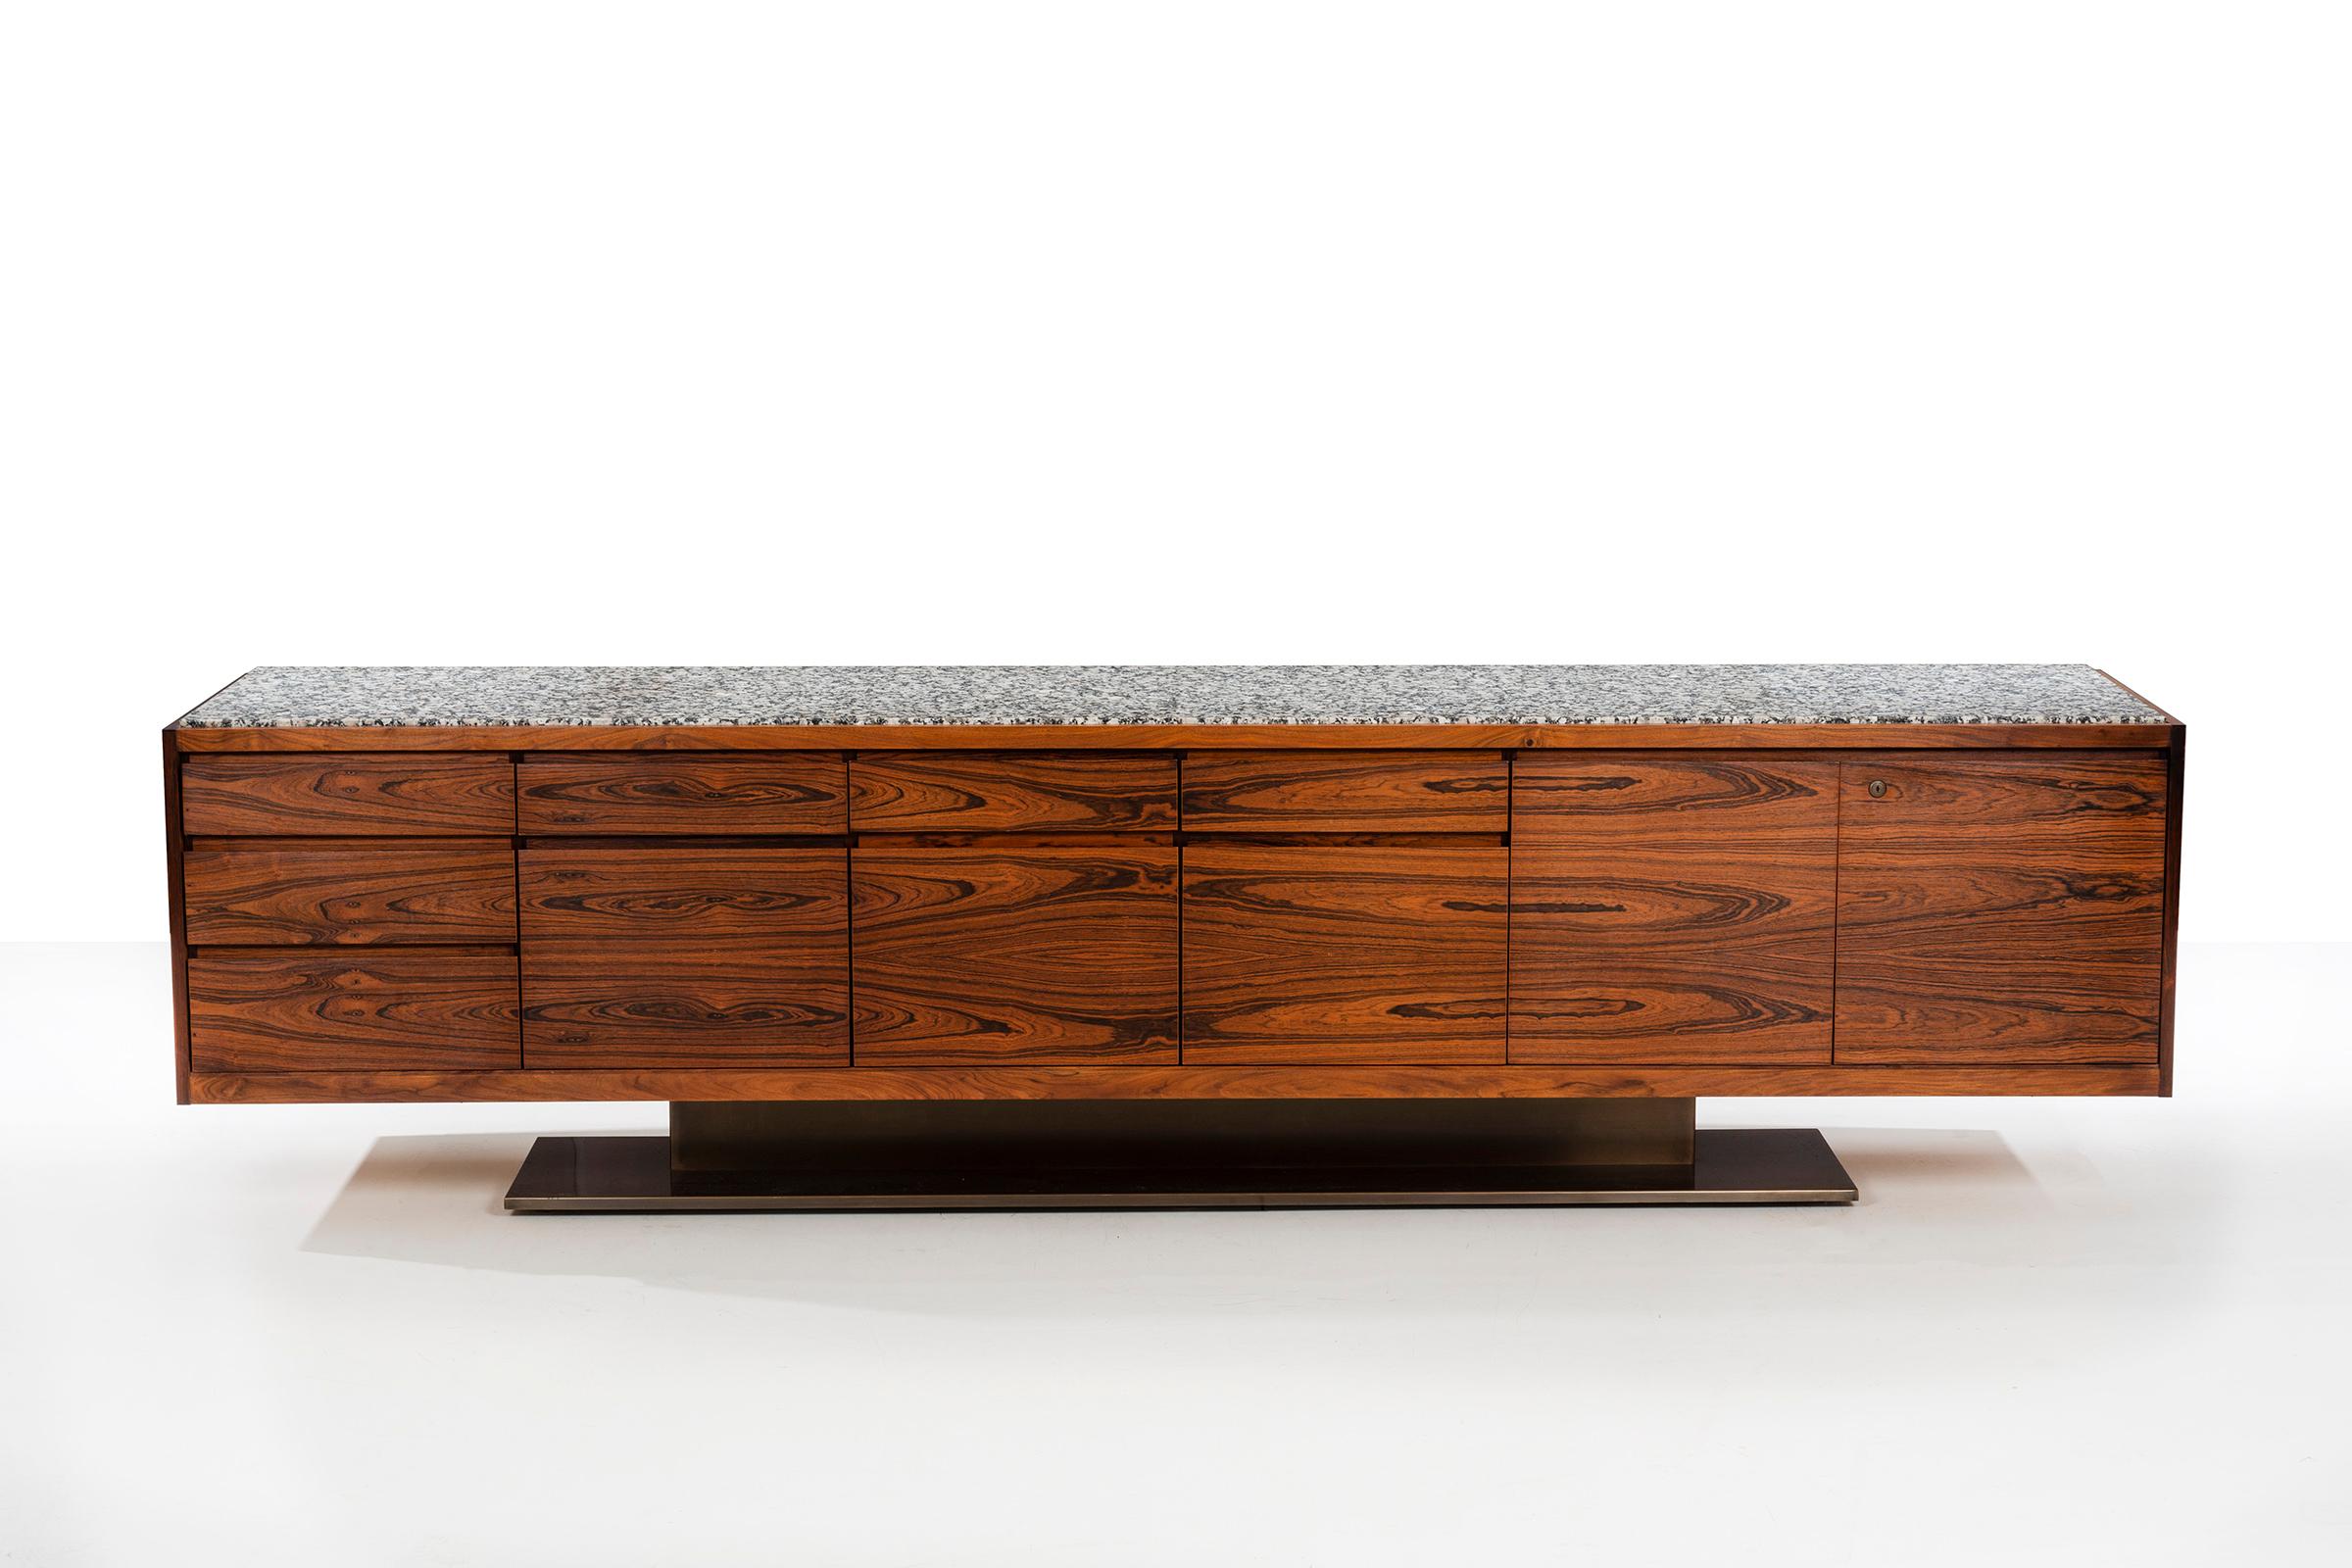 Exceptional monumental bookmatched highly figured rosewood veneer credenza by Platner for Lehigh Leopold. Composed of a three stacked drawer module, three file drawer modules with drawers above and double door section concealing three pull-out